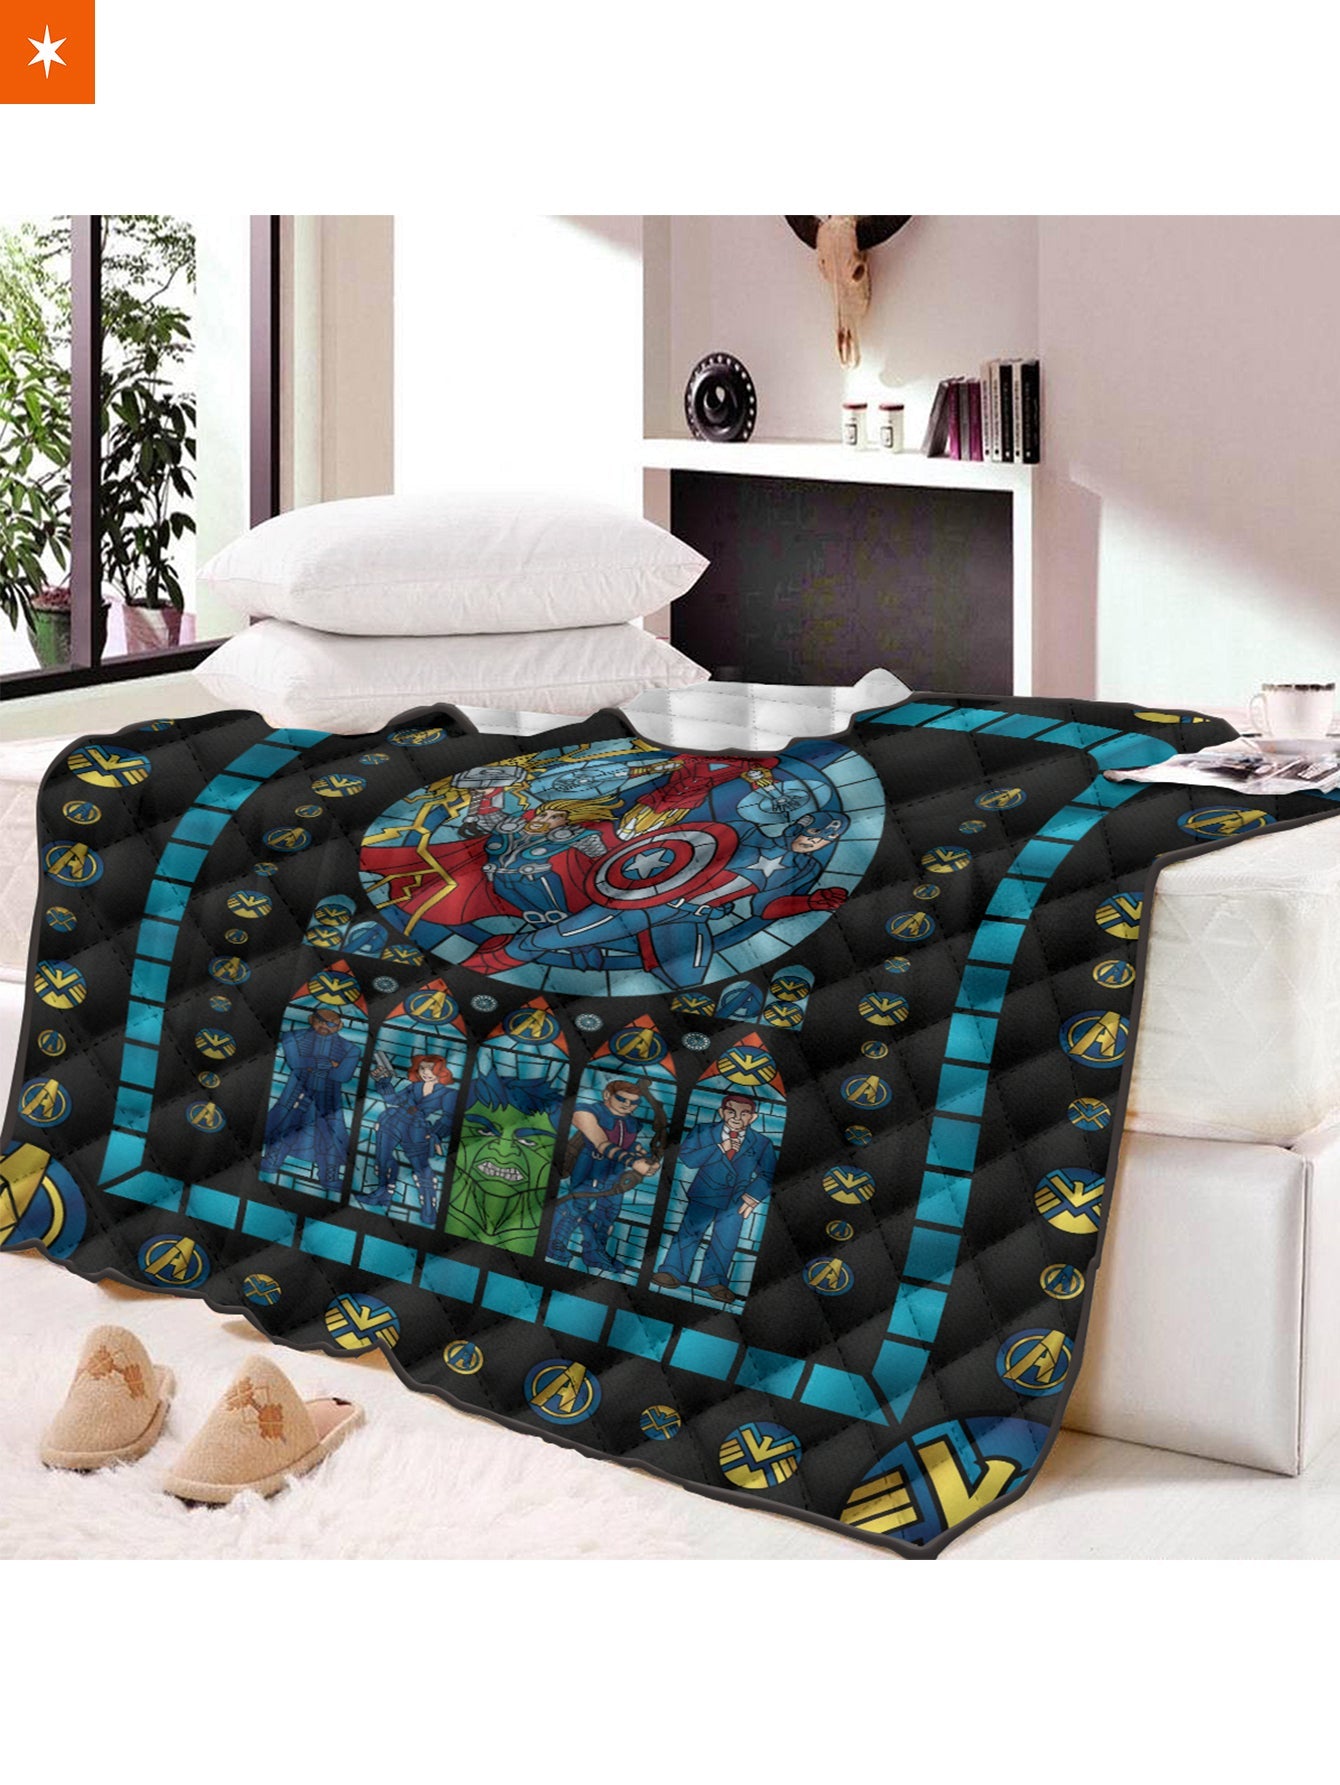 Fandomaniax - Avengers Stained Glass Quilt Blanket